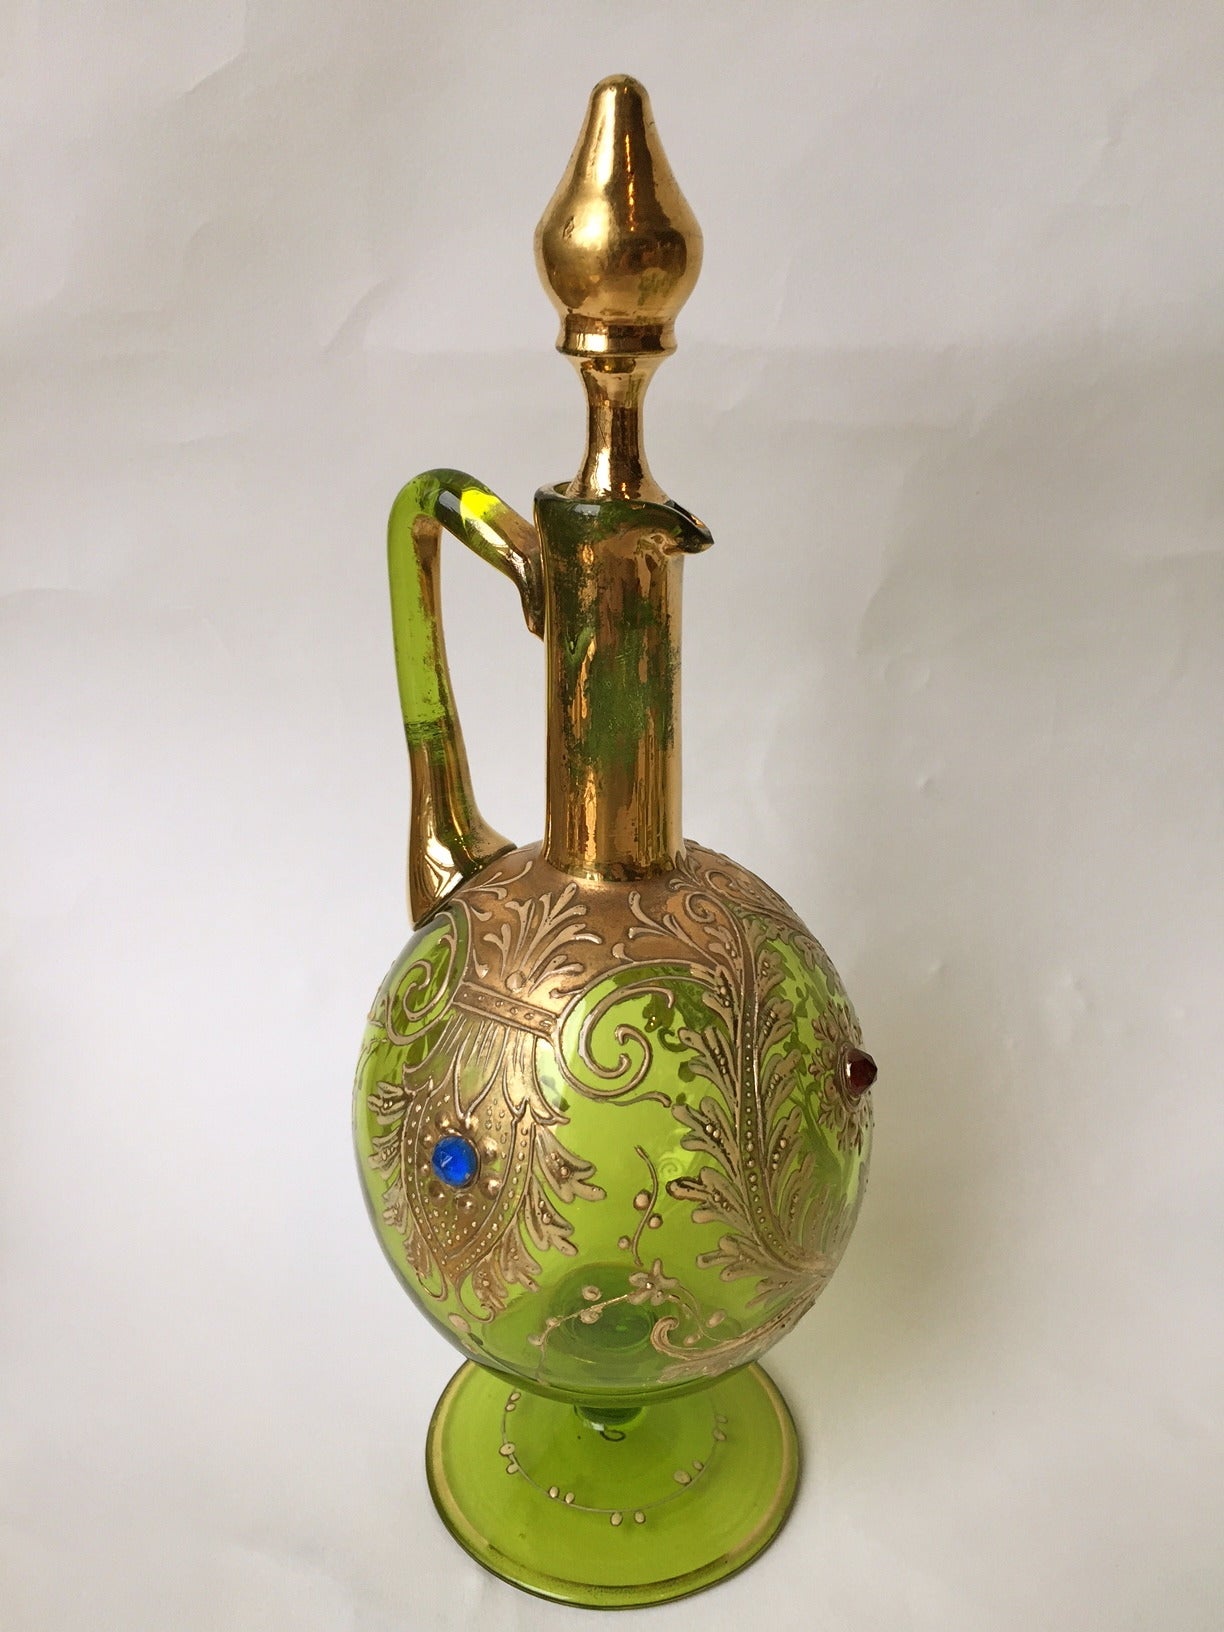 Superb Moser Jewel Applied Gilt Highlighted Liquor Set, Austria, circa 1900 In Excellent Condition For Sale In Redding, CA